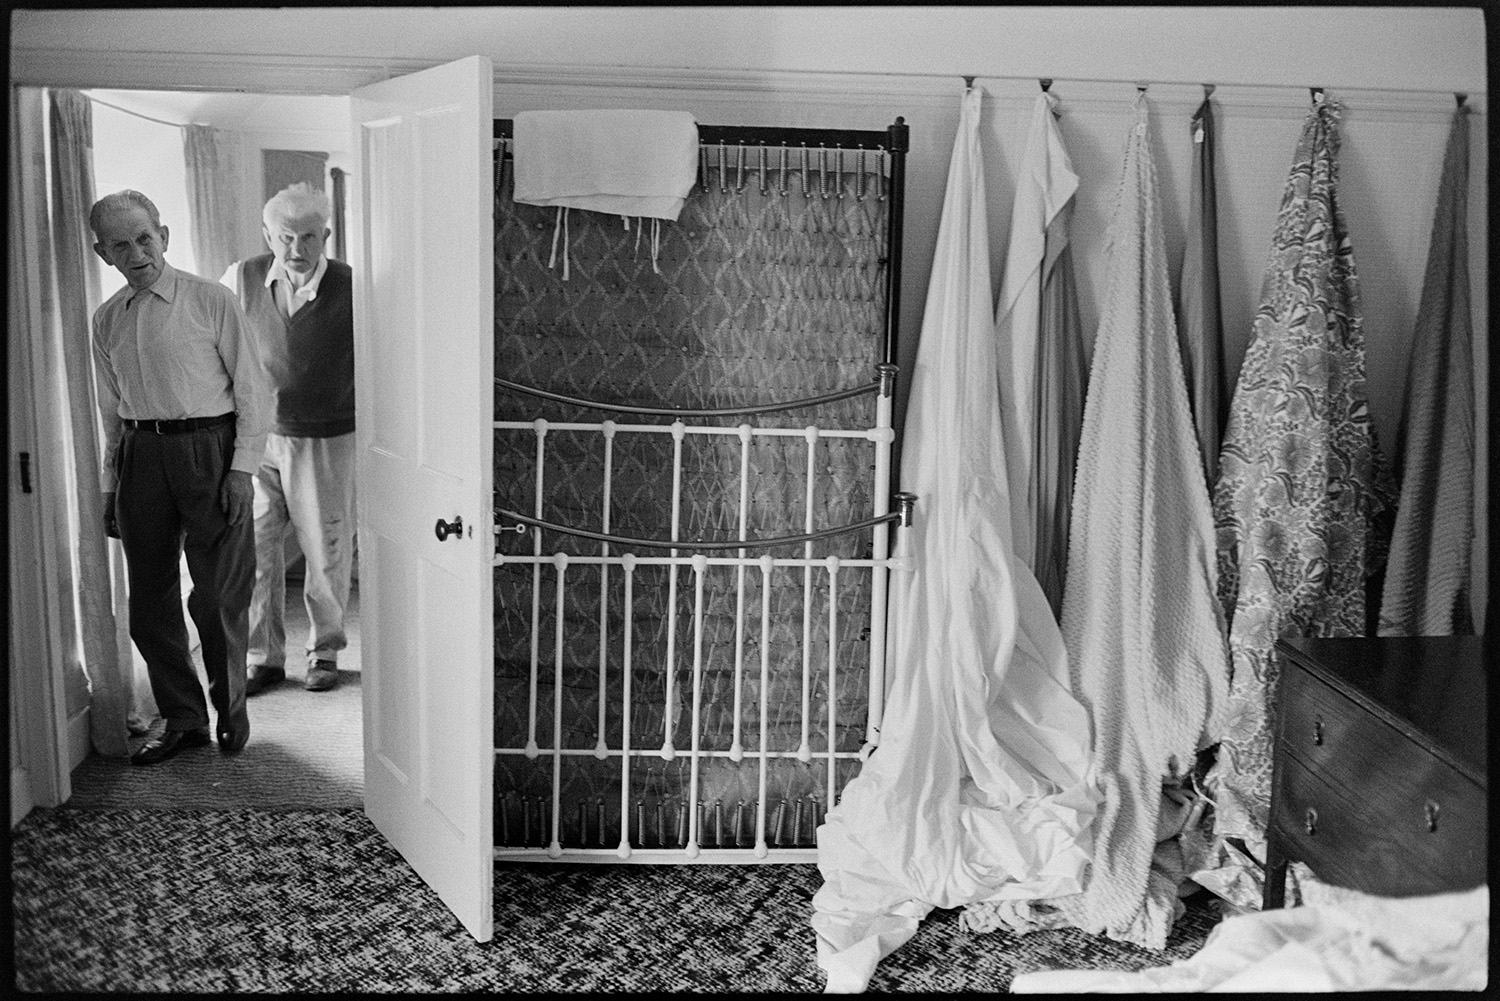 People viewing house contents before sale, bedroom furniture, lace, material. 
[Two men looking at items in Arscotts House, Dolton, on the viewing day before the contents sale of the house. A mattress, bed frame and fabric is displayed against one of the bedroom walls.]